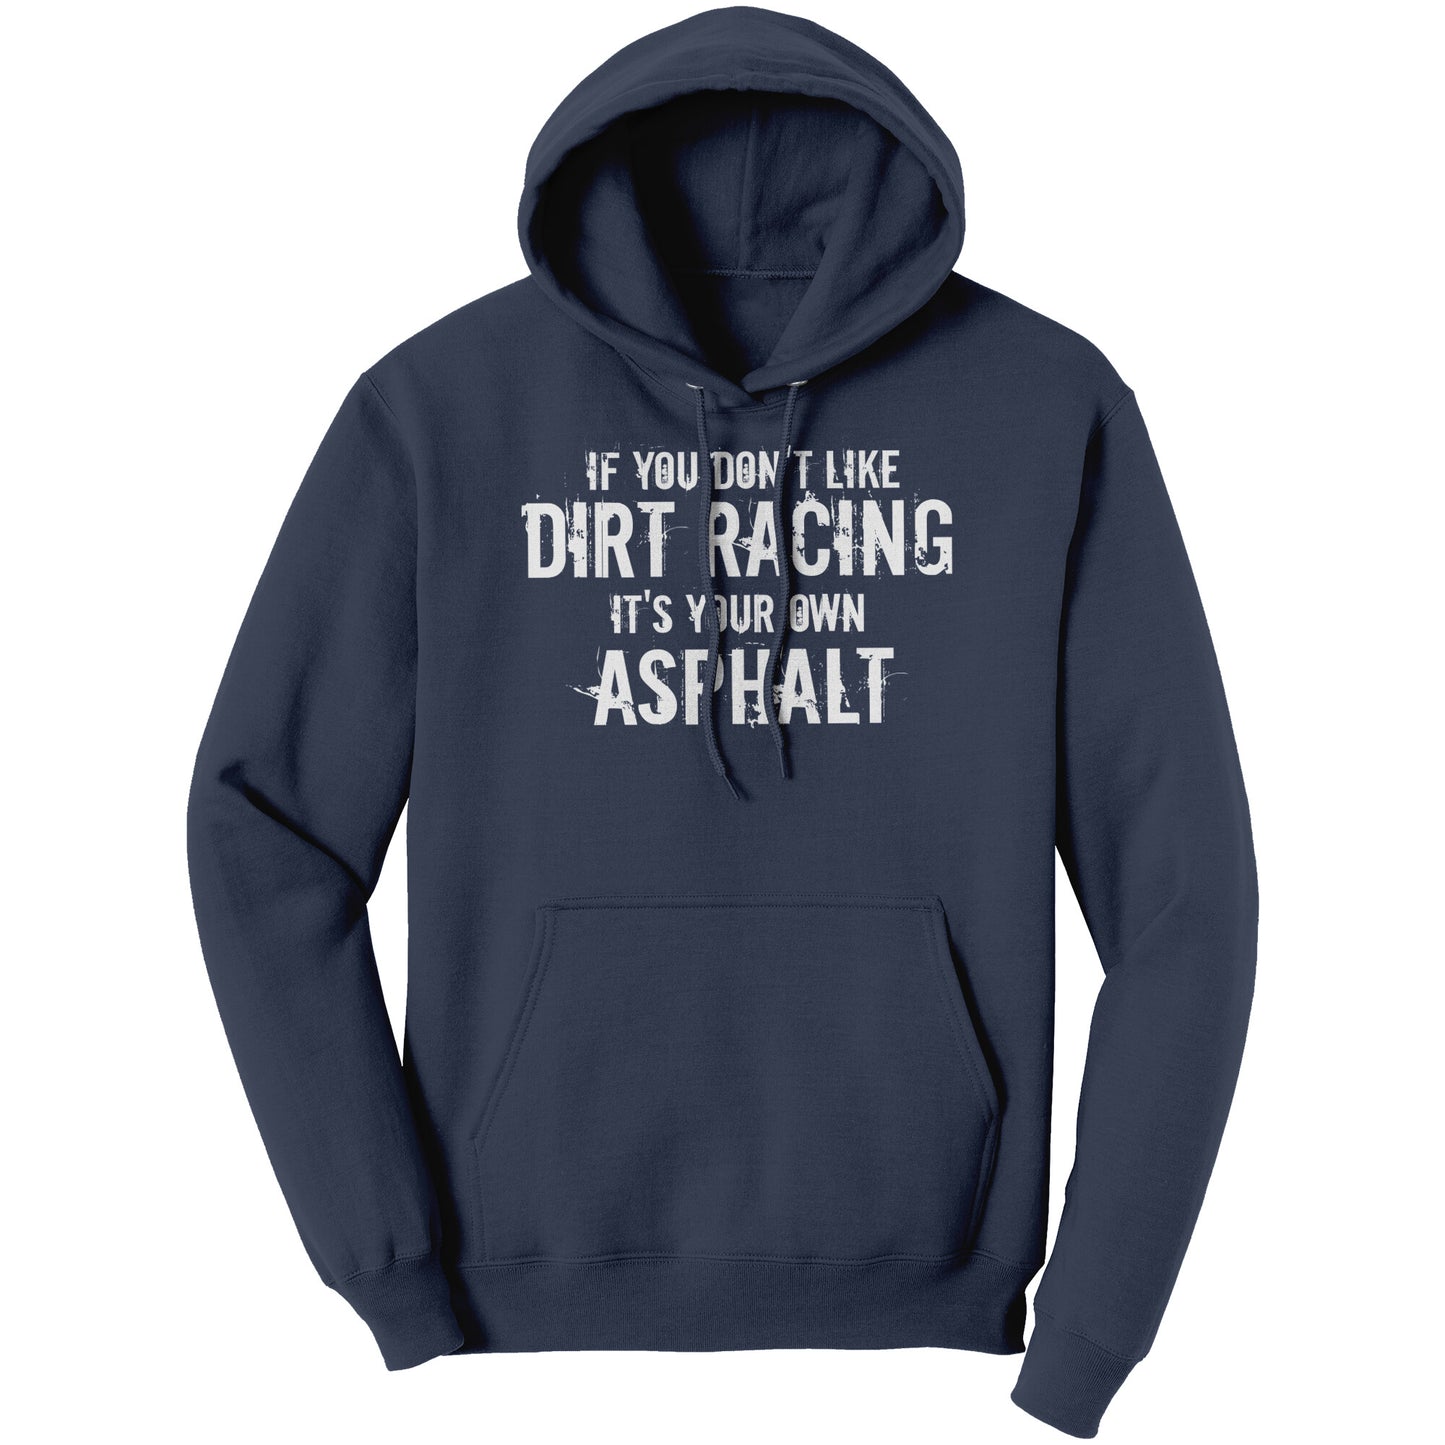 If You Don't Like Dirt Racing It's Your Own Asphalt Hoodie